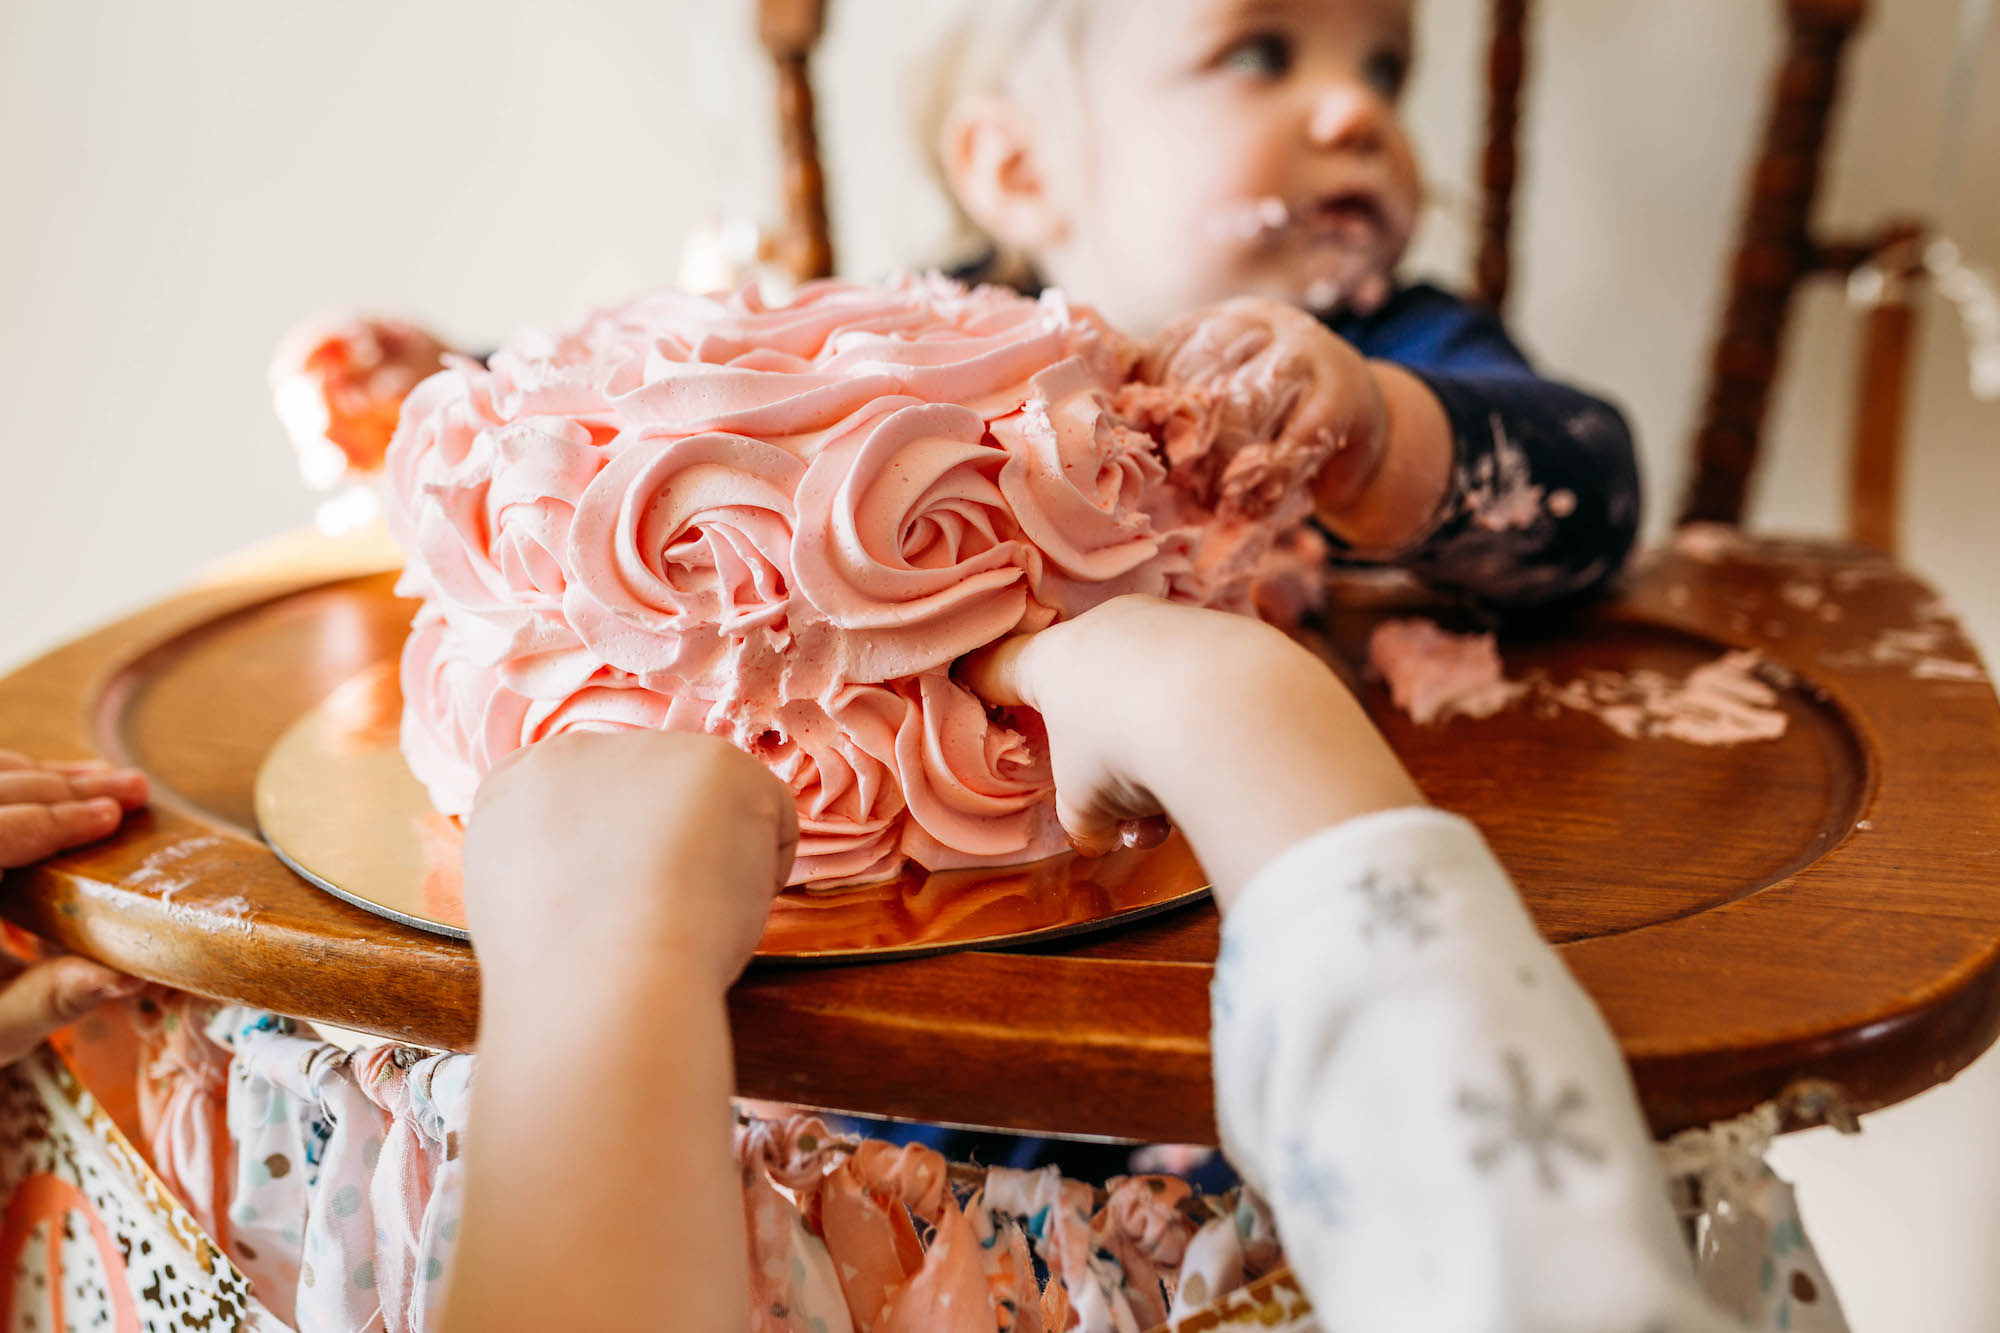 Kids with hands in cake - Documentary Family Photography